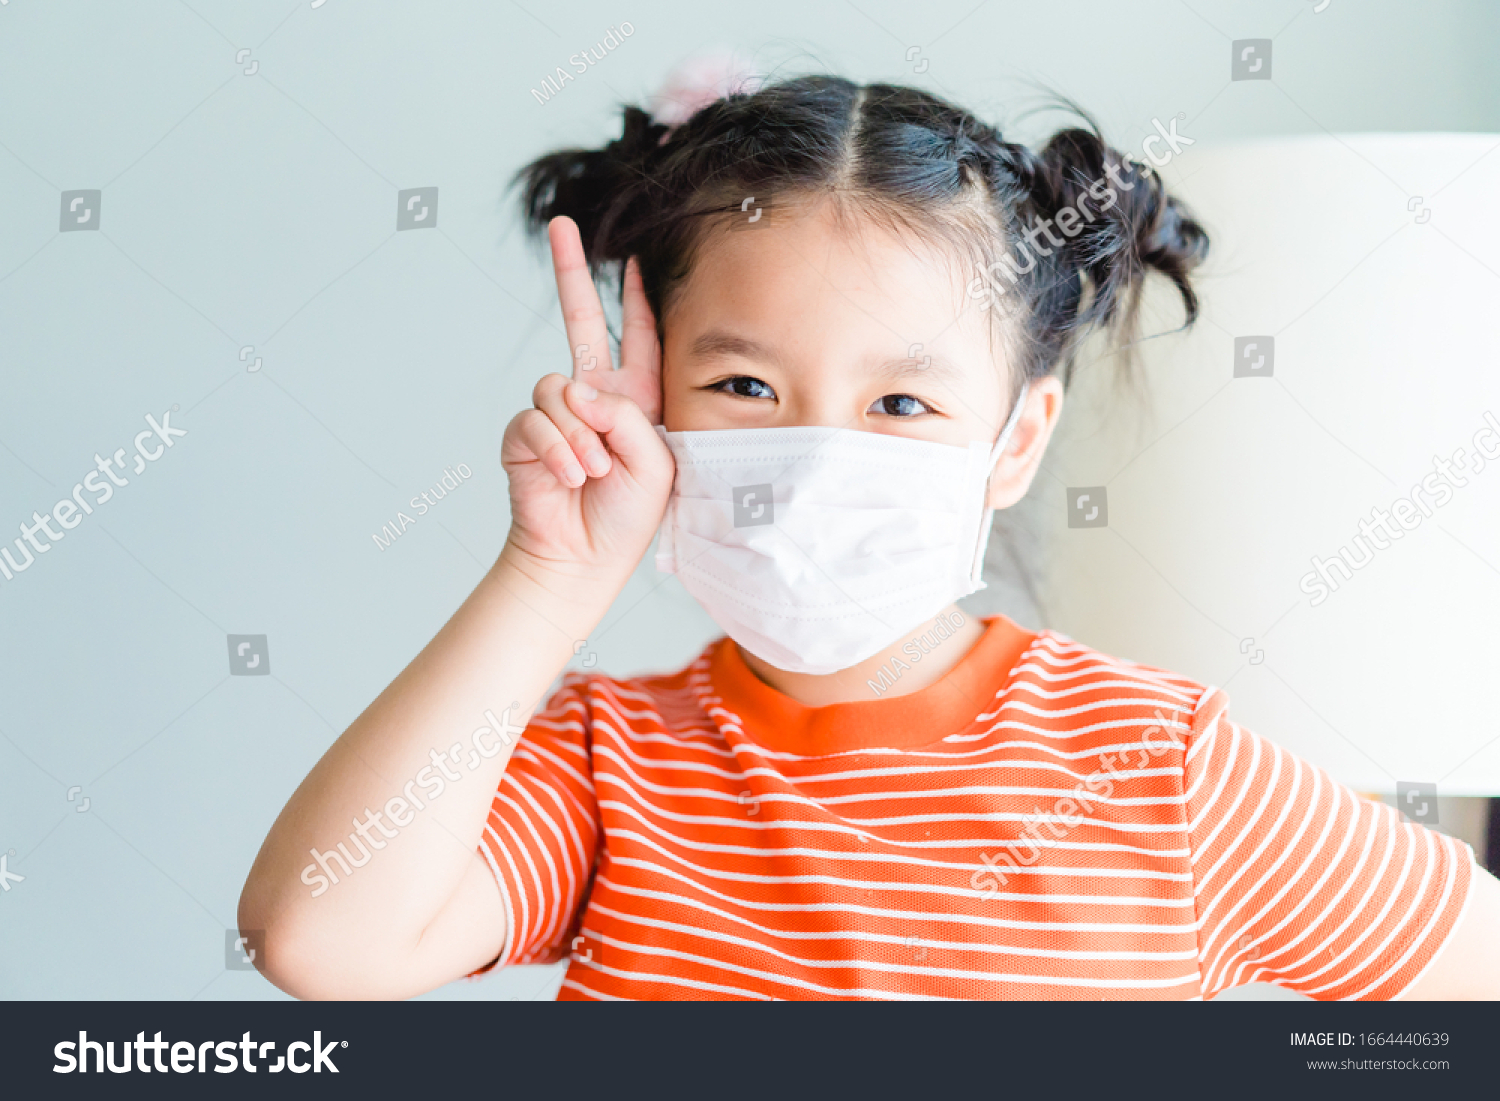 Coronavirus and Air pollution pm2.5 concept.Little chinese girl wearing mask for quarantine and show fighting gesture with Covid-19 virus outbreak.Wuhan coronavirus and epidemic virus symptoms. #1664440639